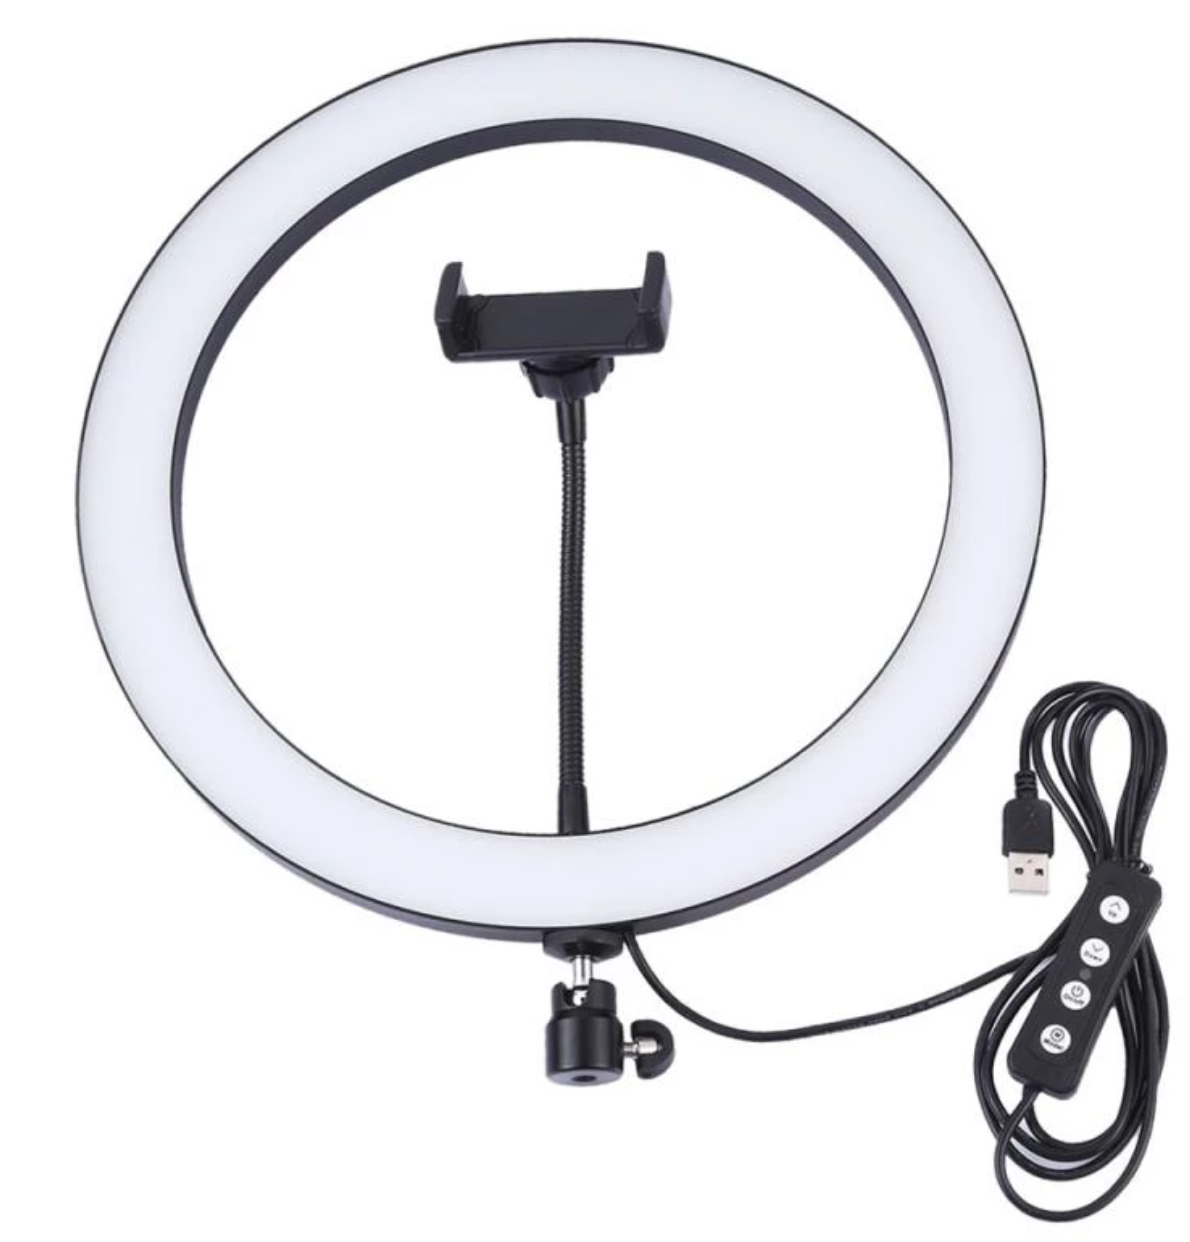 JMARY Ring Light with stand - Black